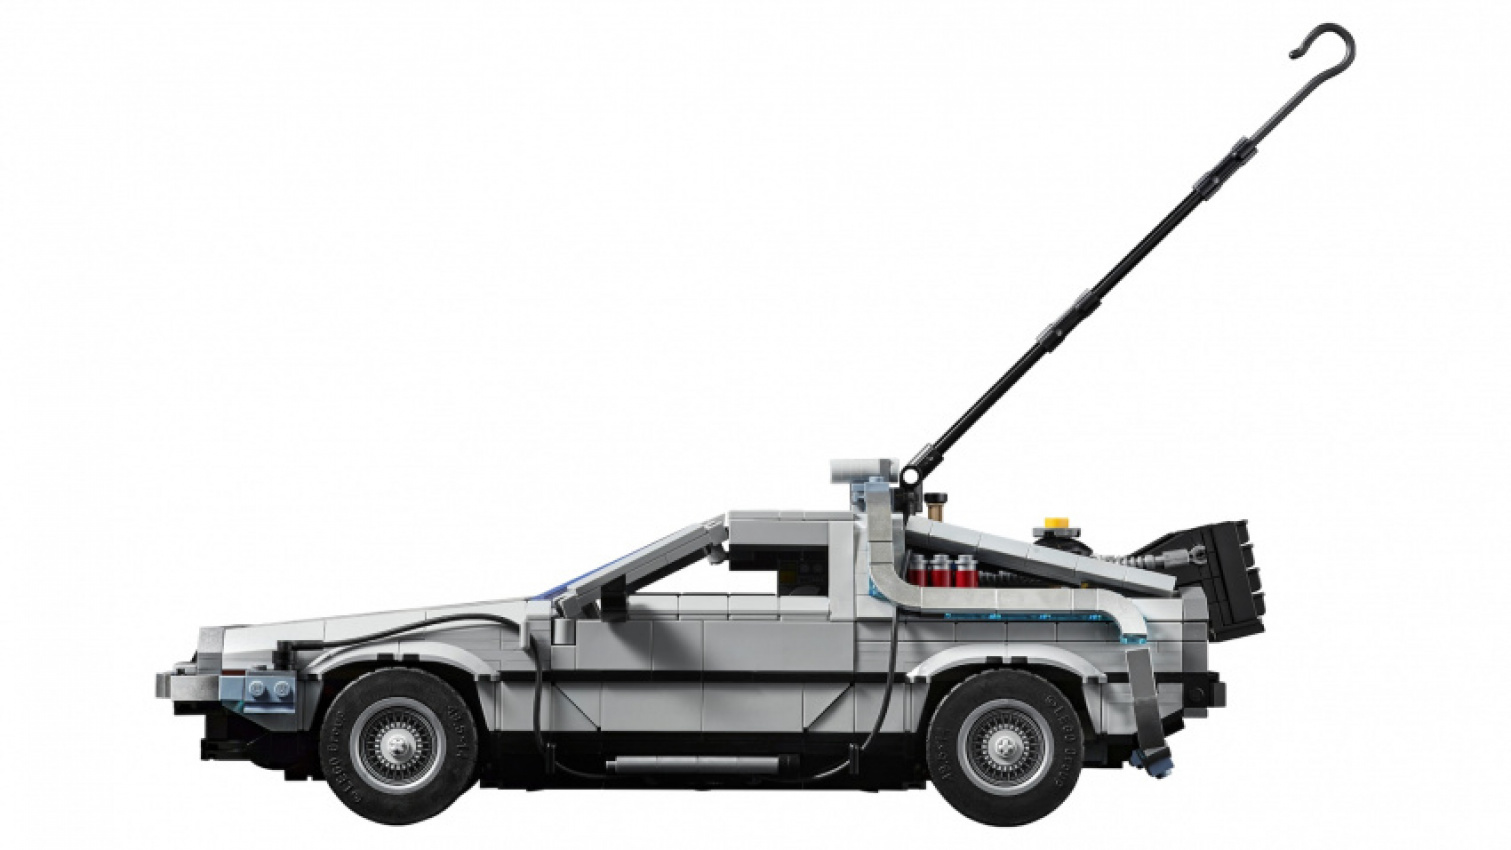 autos, cars, delorean, news, lego goes back to the future with three-in-one delorean time machine kit